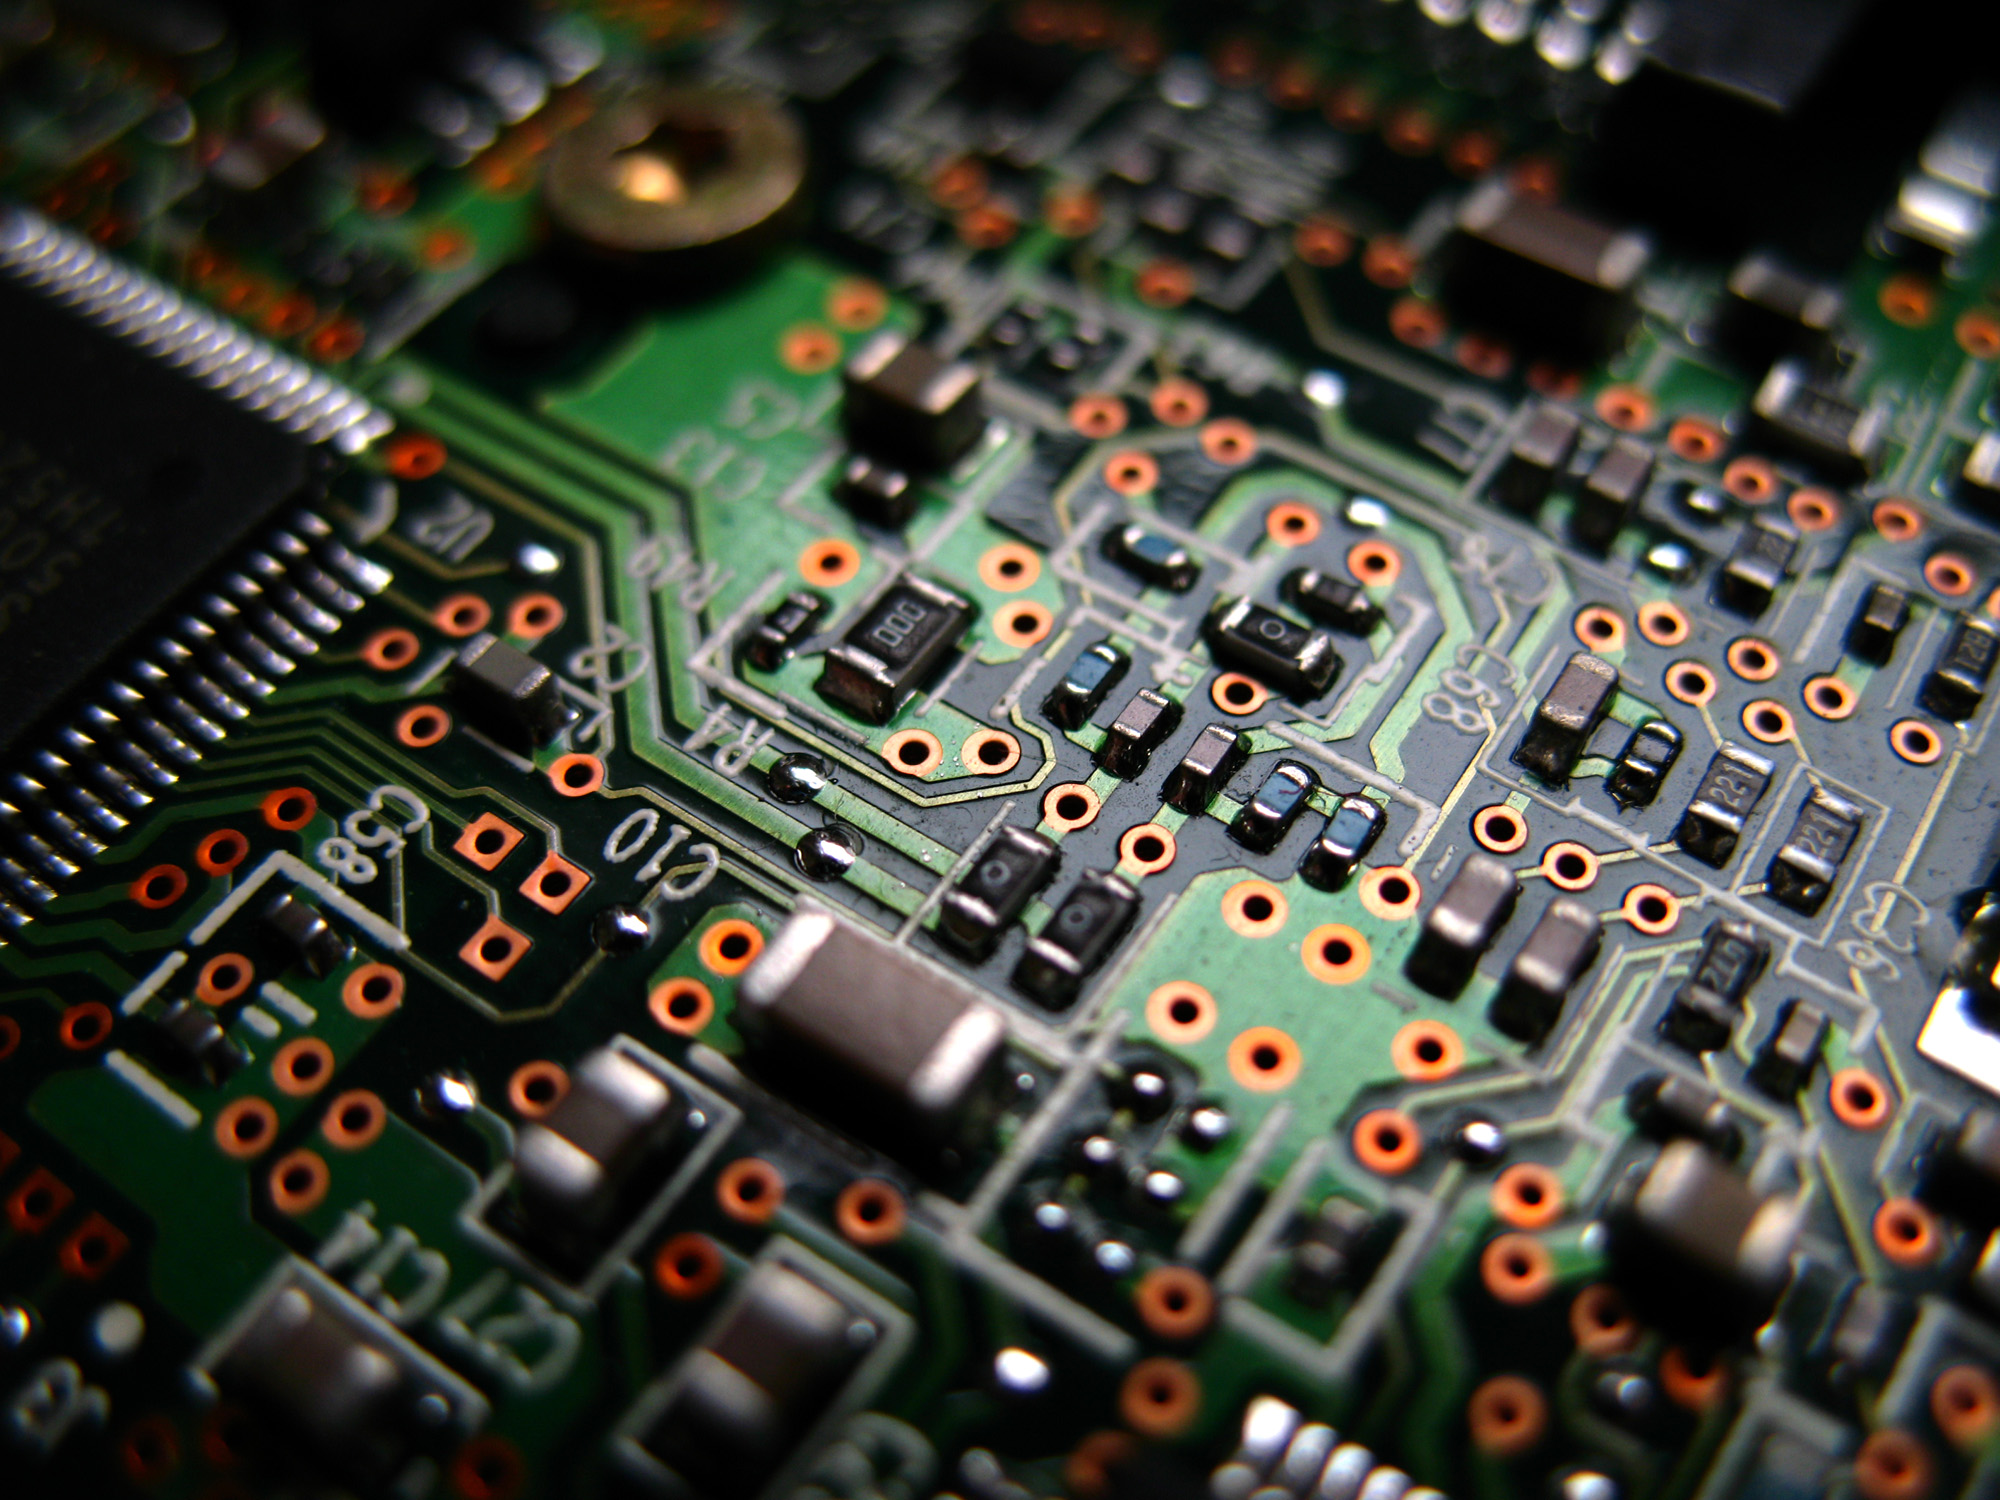 Free Microcontroller Photos and Vectors